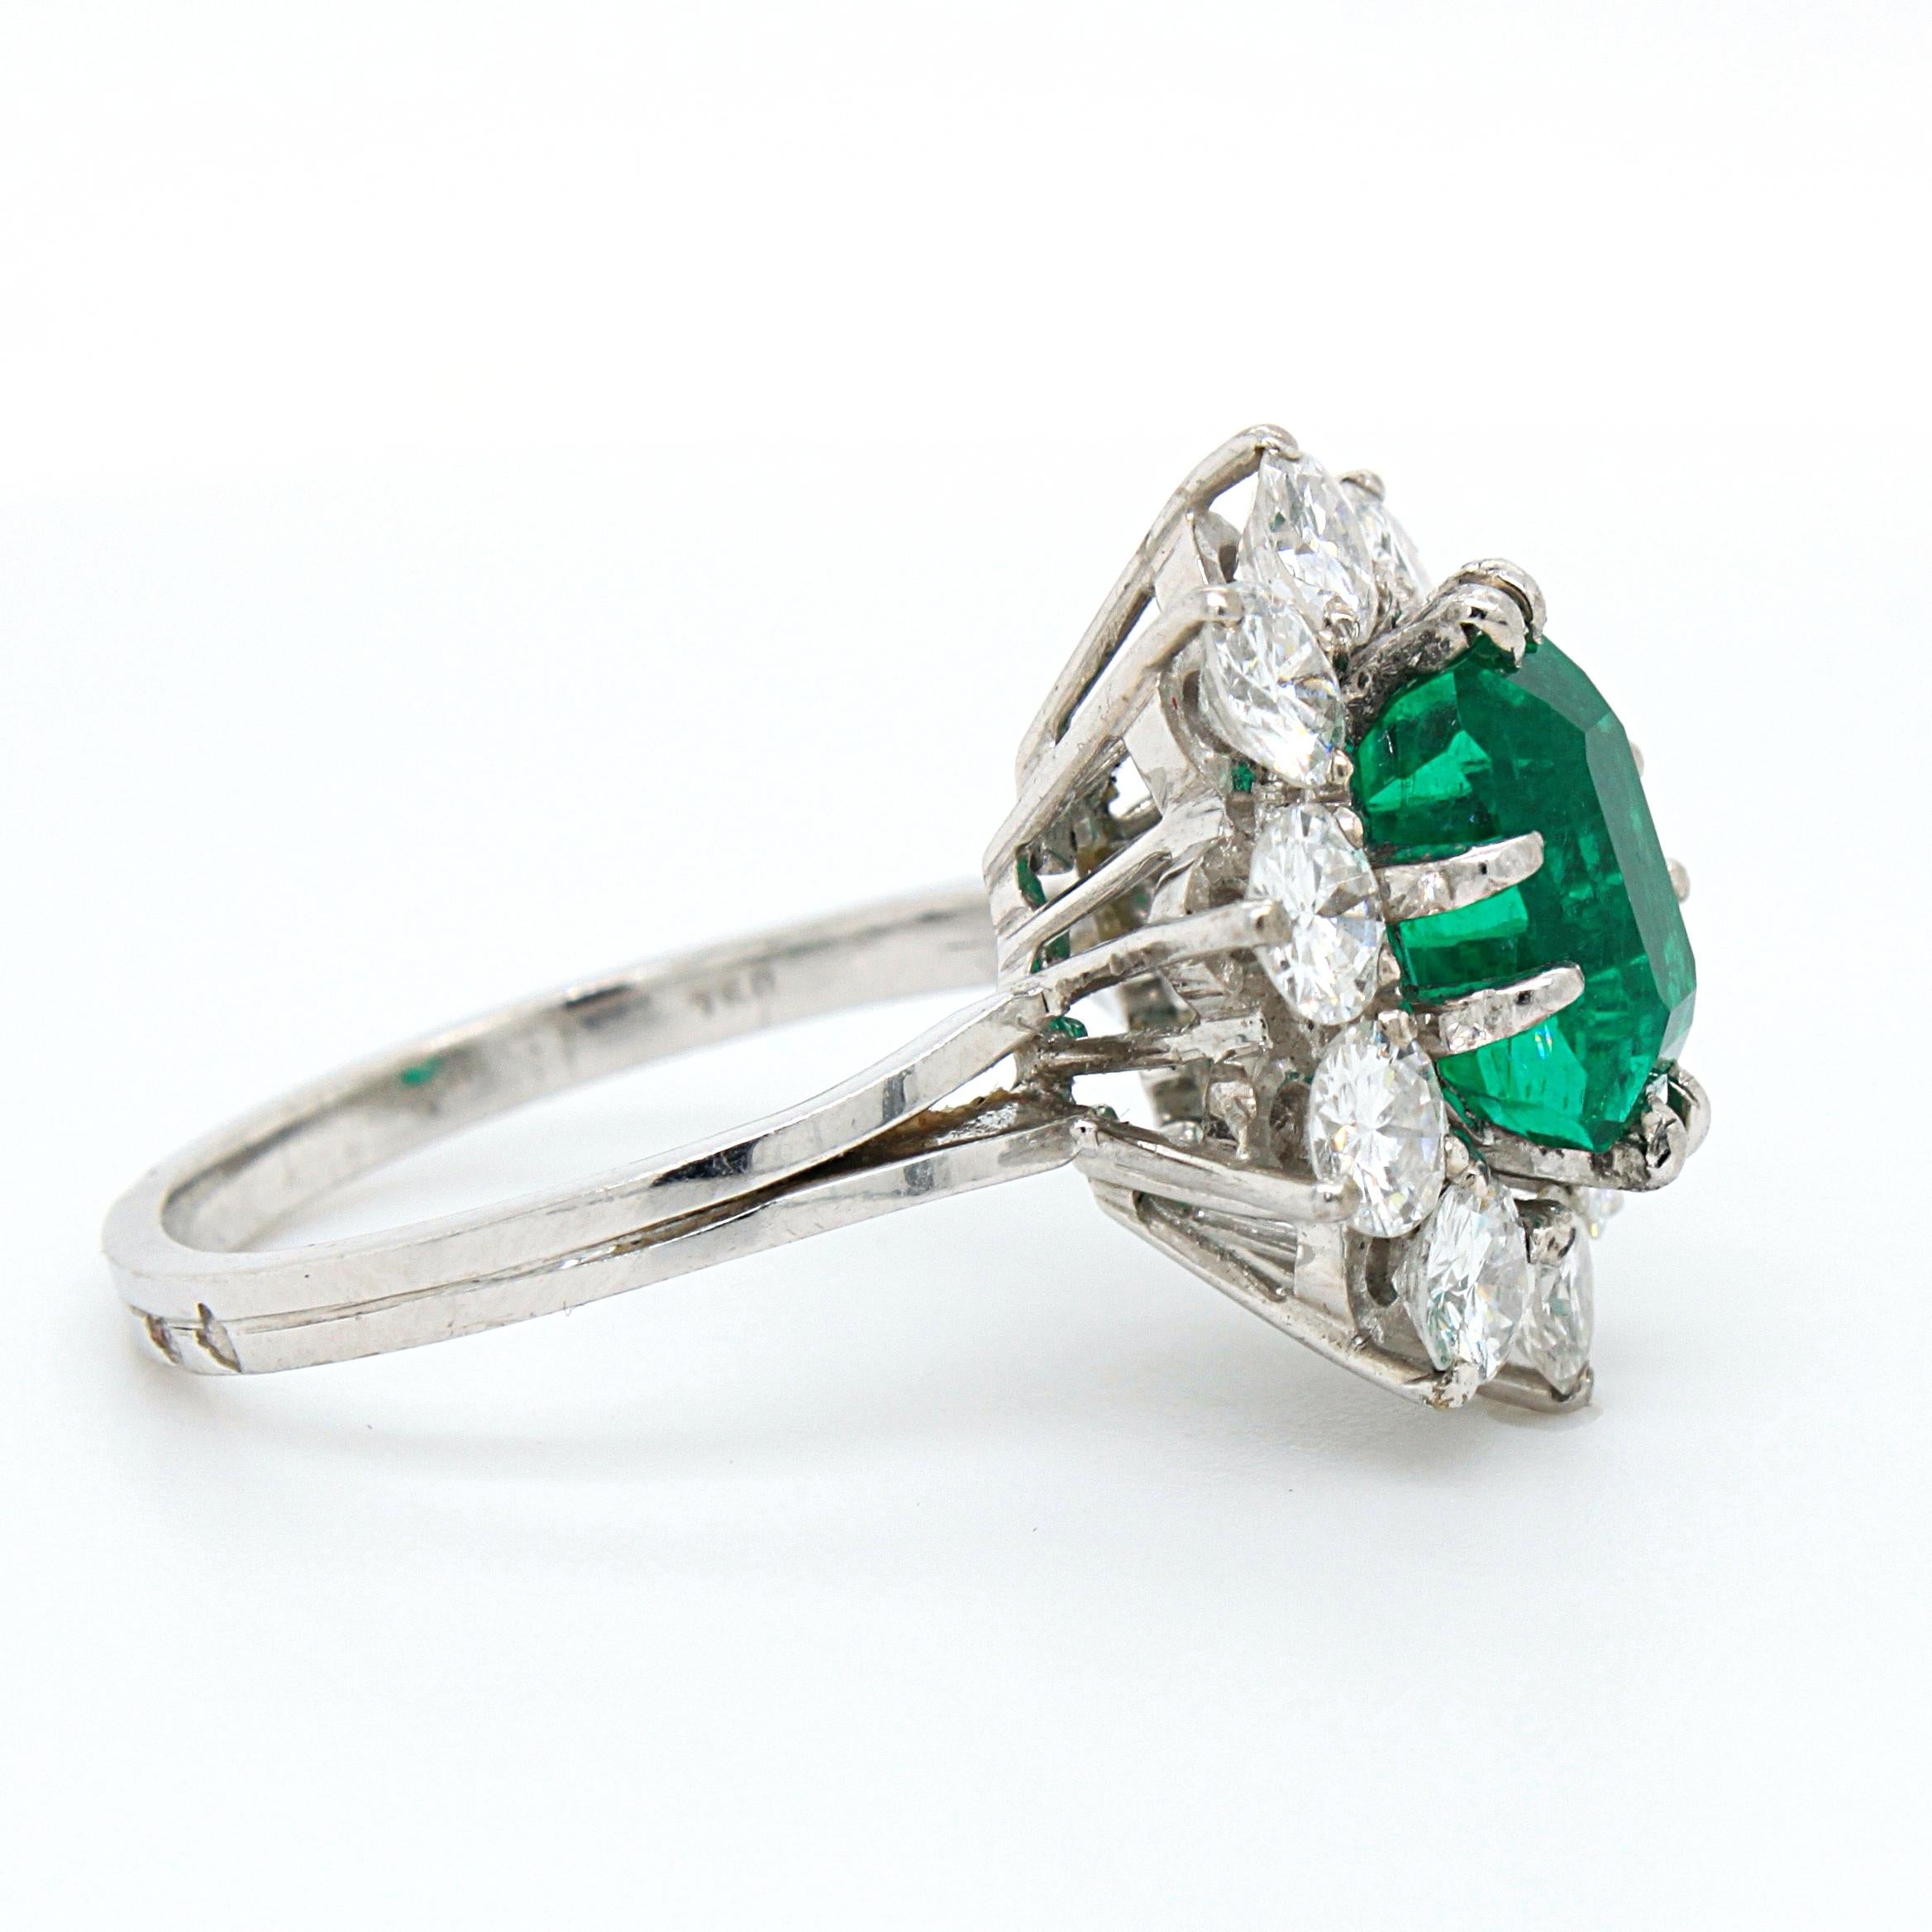 Columbian Emerald 'Minor-Oil', 1.88ct, and Diamond Ring, France For Sale 2